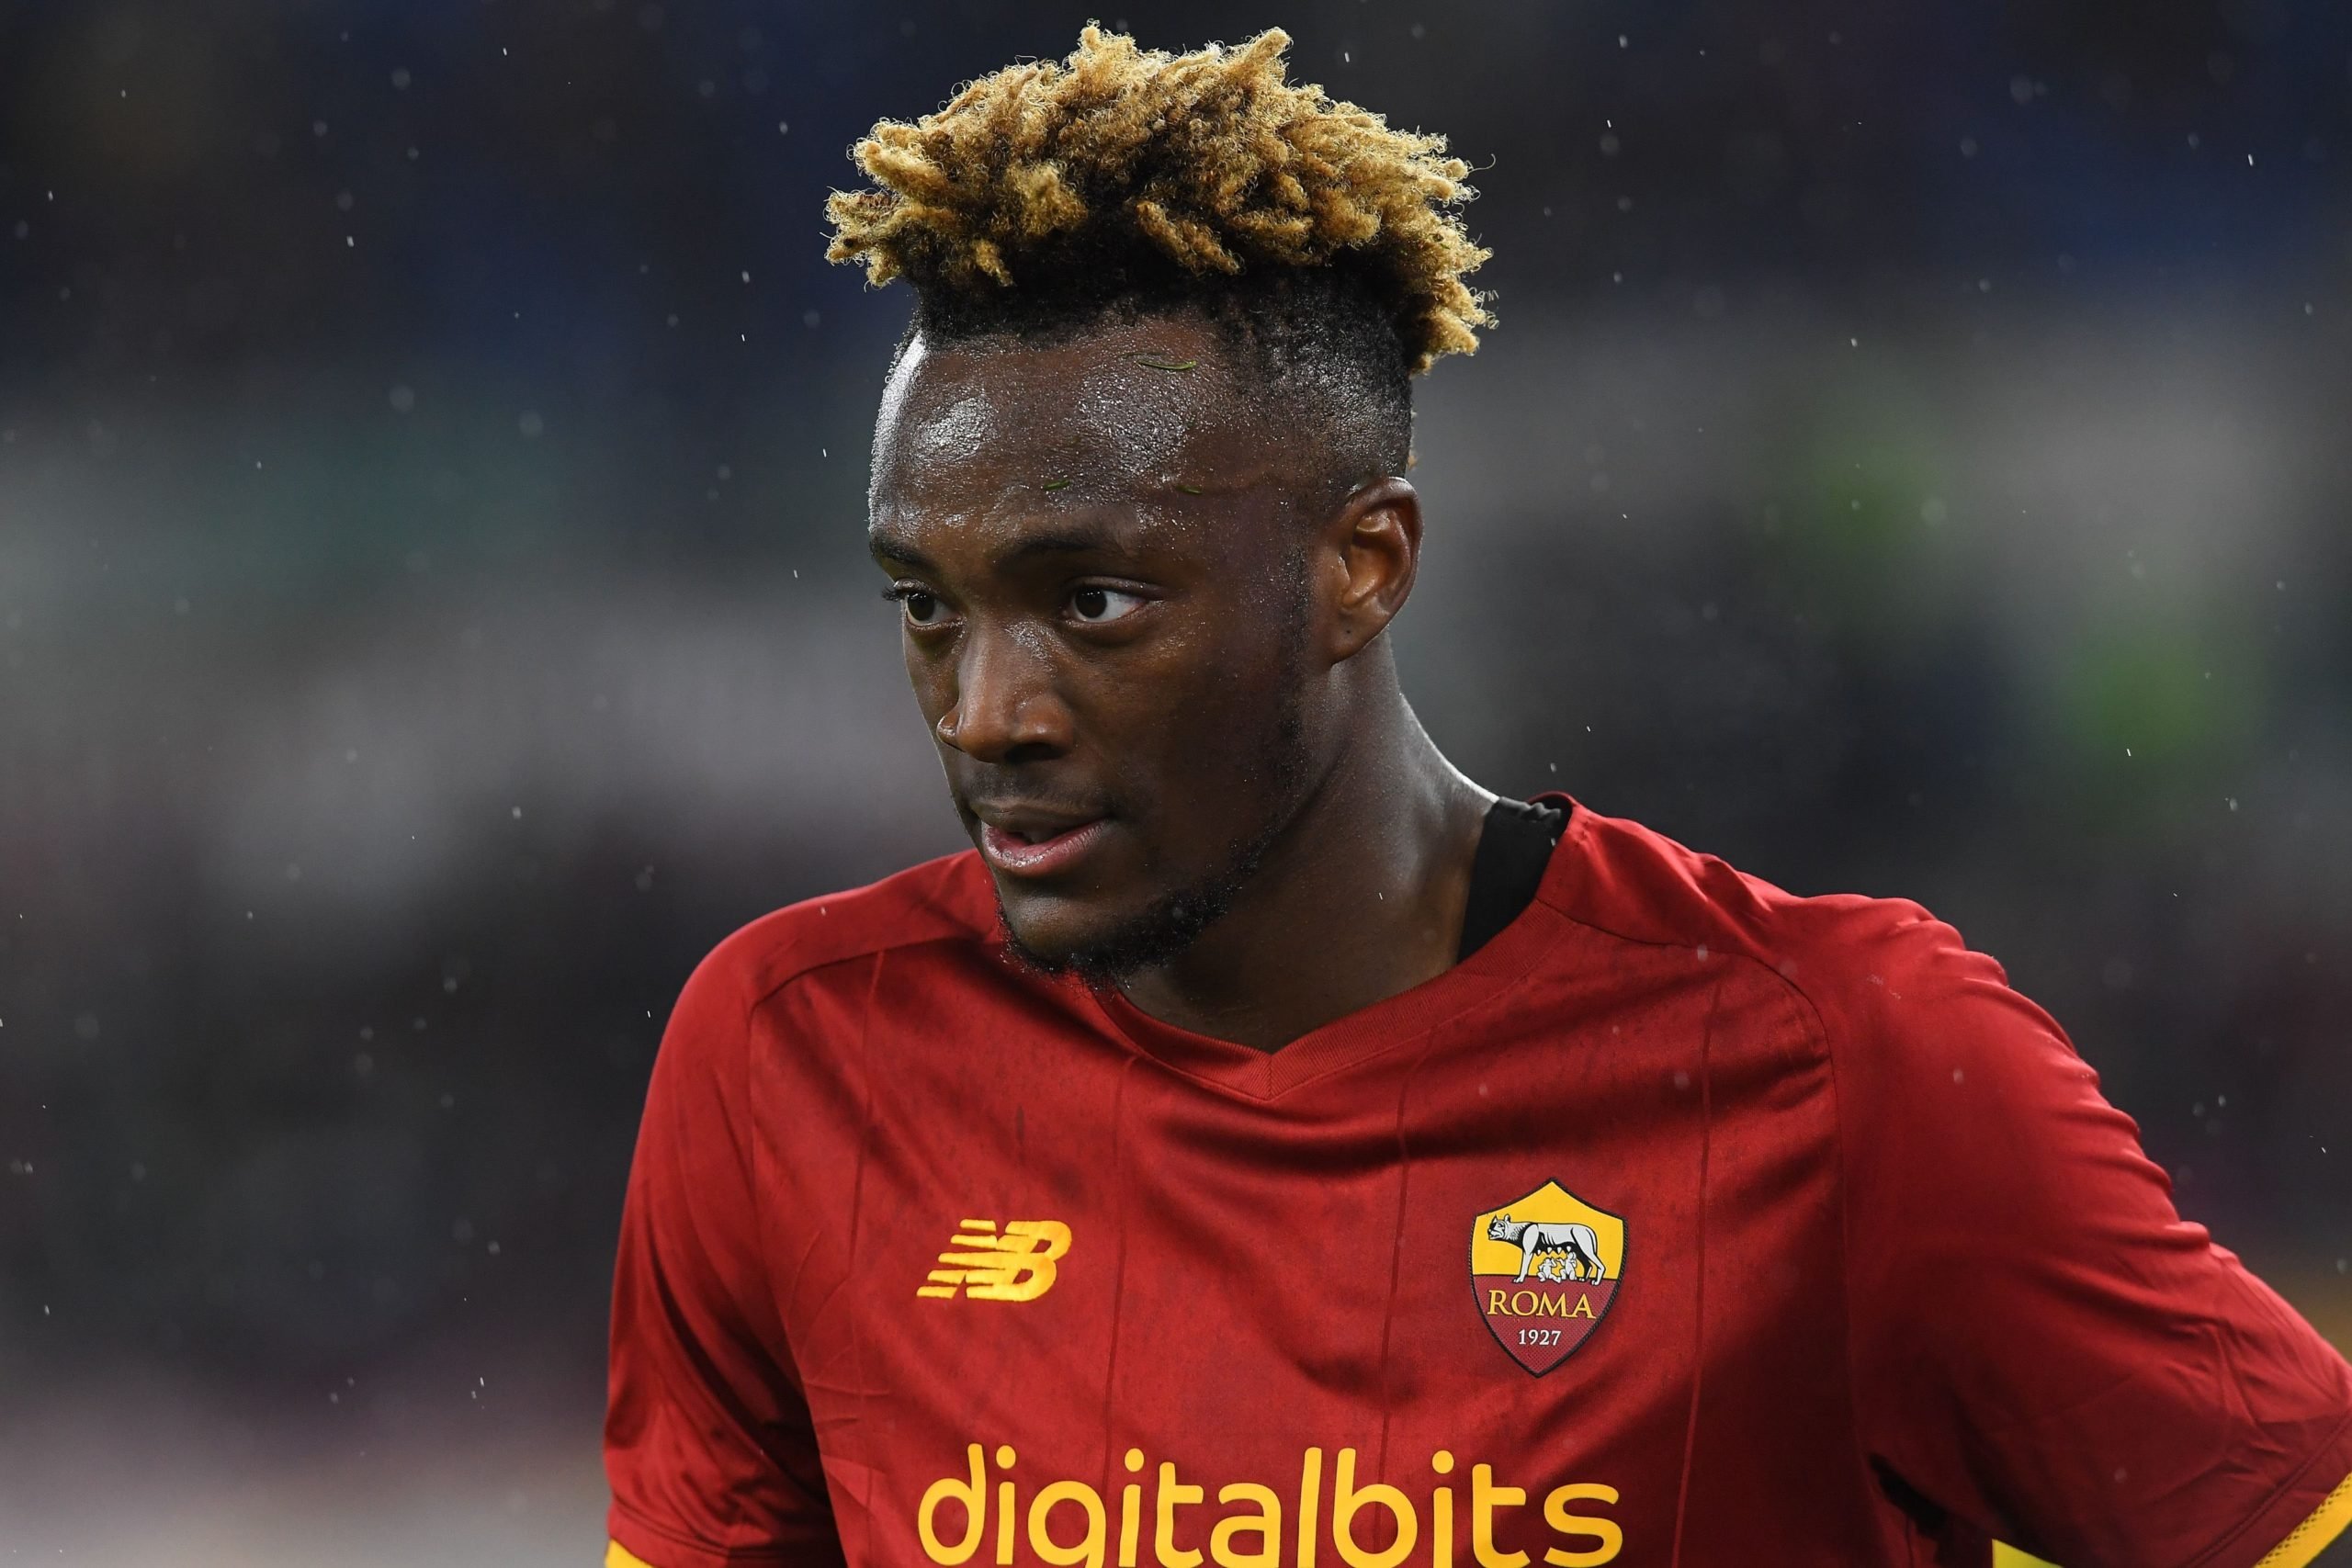 ‘One of the first things’: Tammy Abraham shares the cheeky reason Mourinho gave him to leave Chelsea